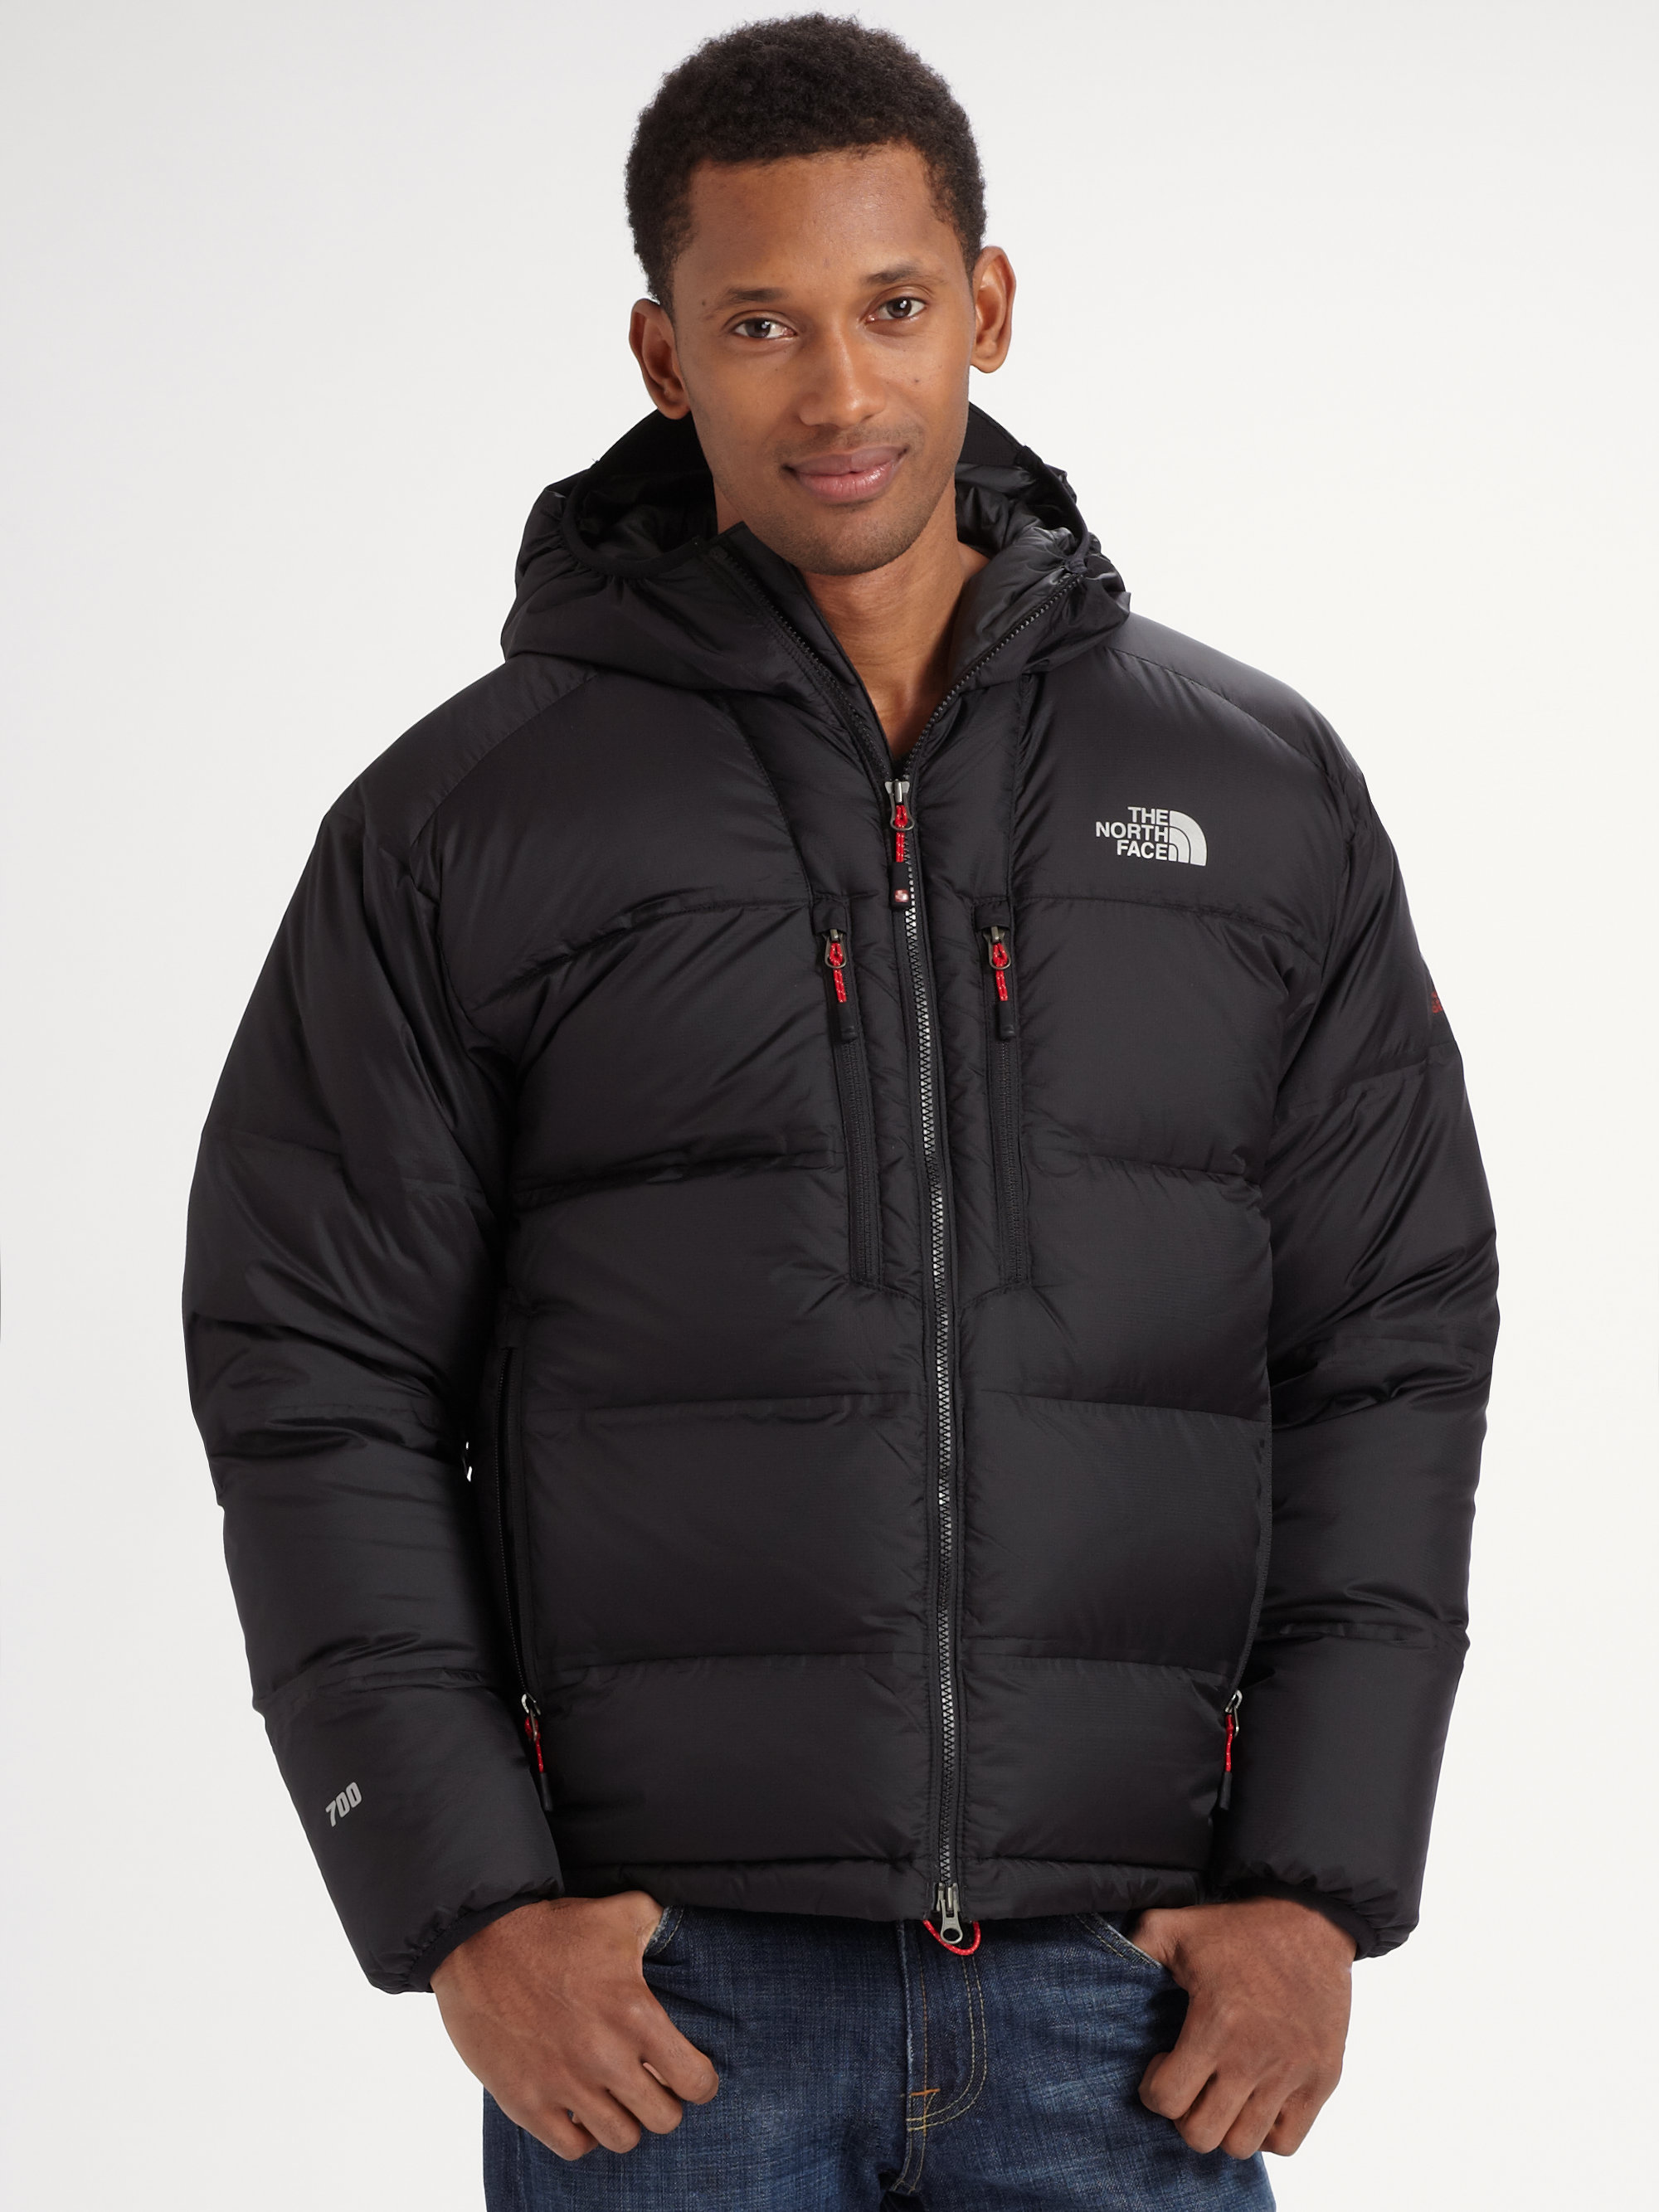 Lyst - The north face Prism Optimus Jacket in Black for Men